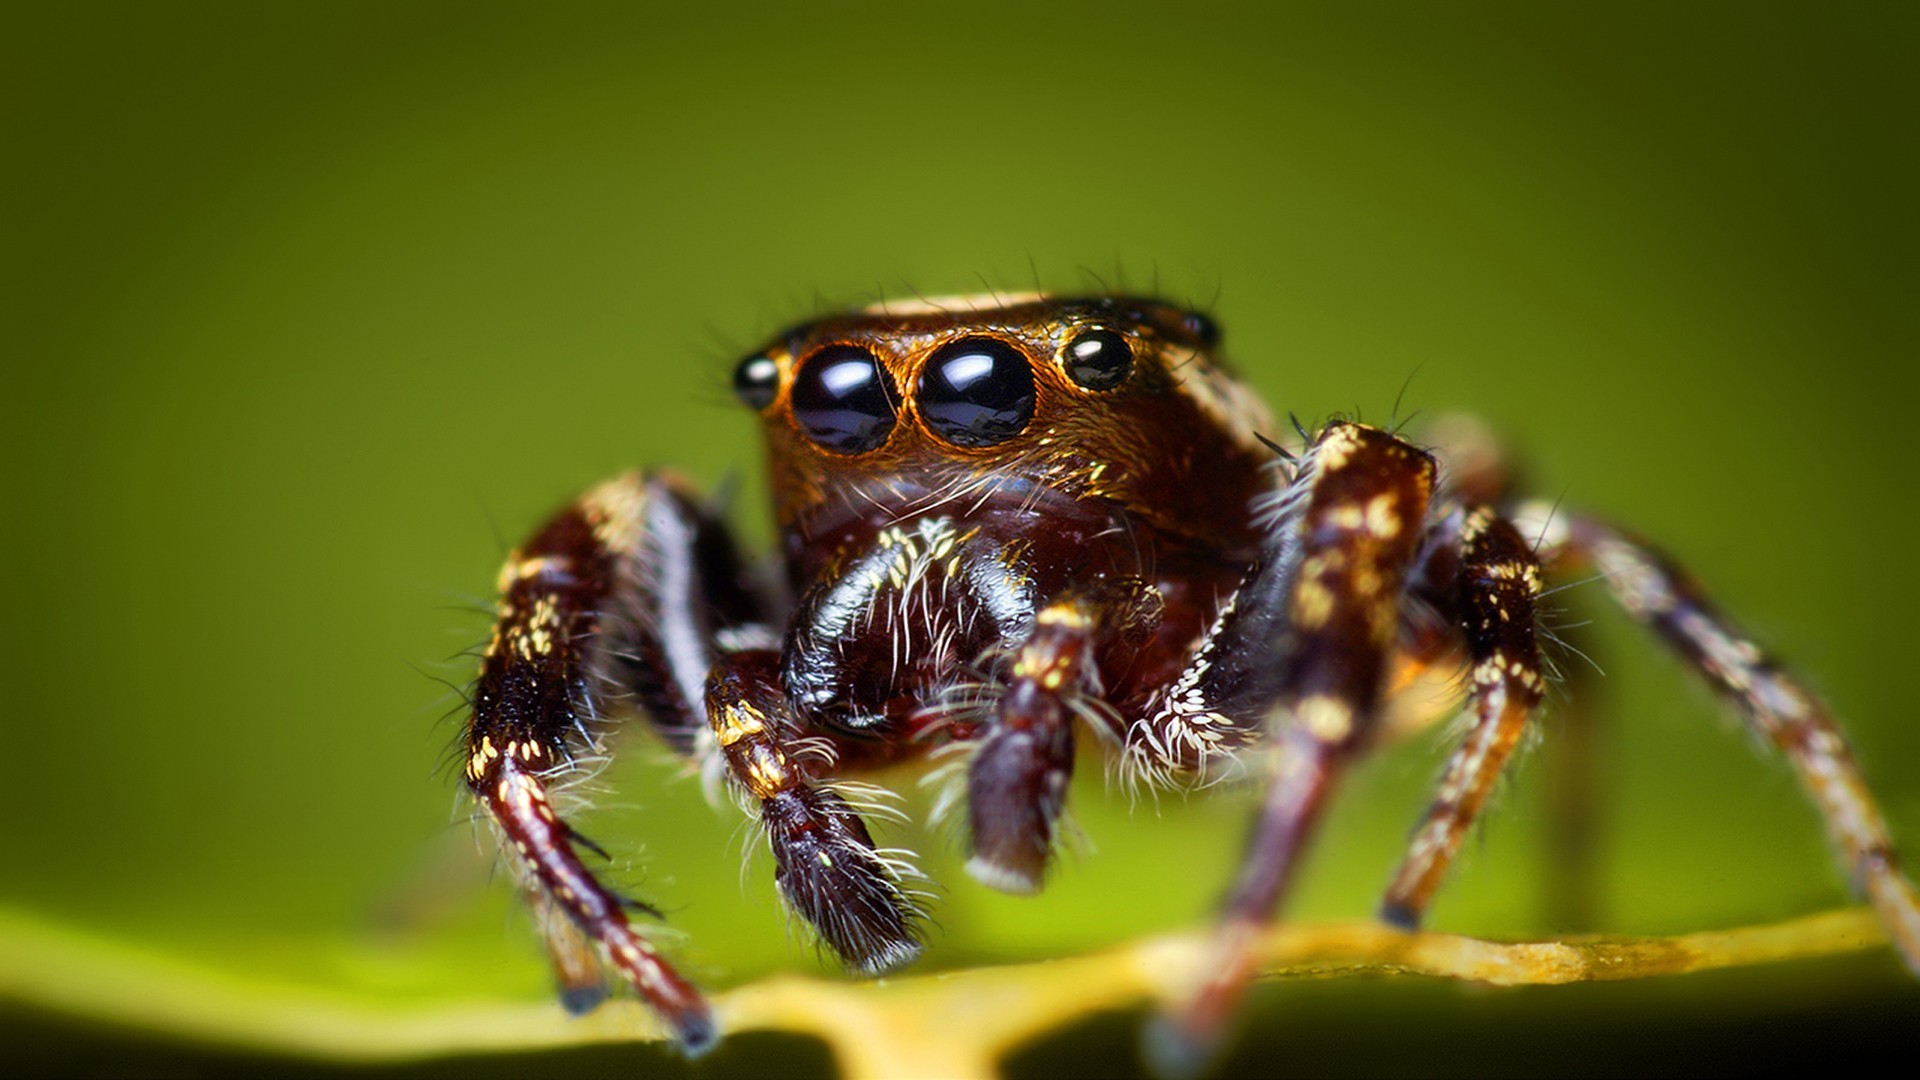 1920x1080 Spider Wallpapers Best Wallpapers | HD Wallpapers | Pinterest | Spider, Hd  wallpaper and Wallpaper